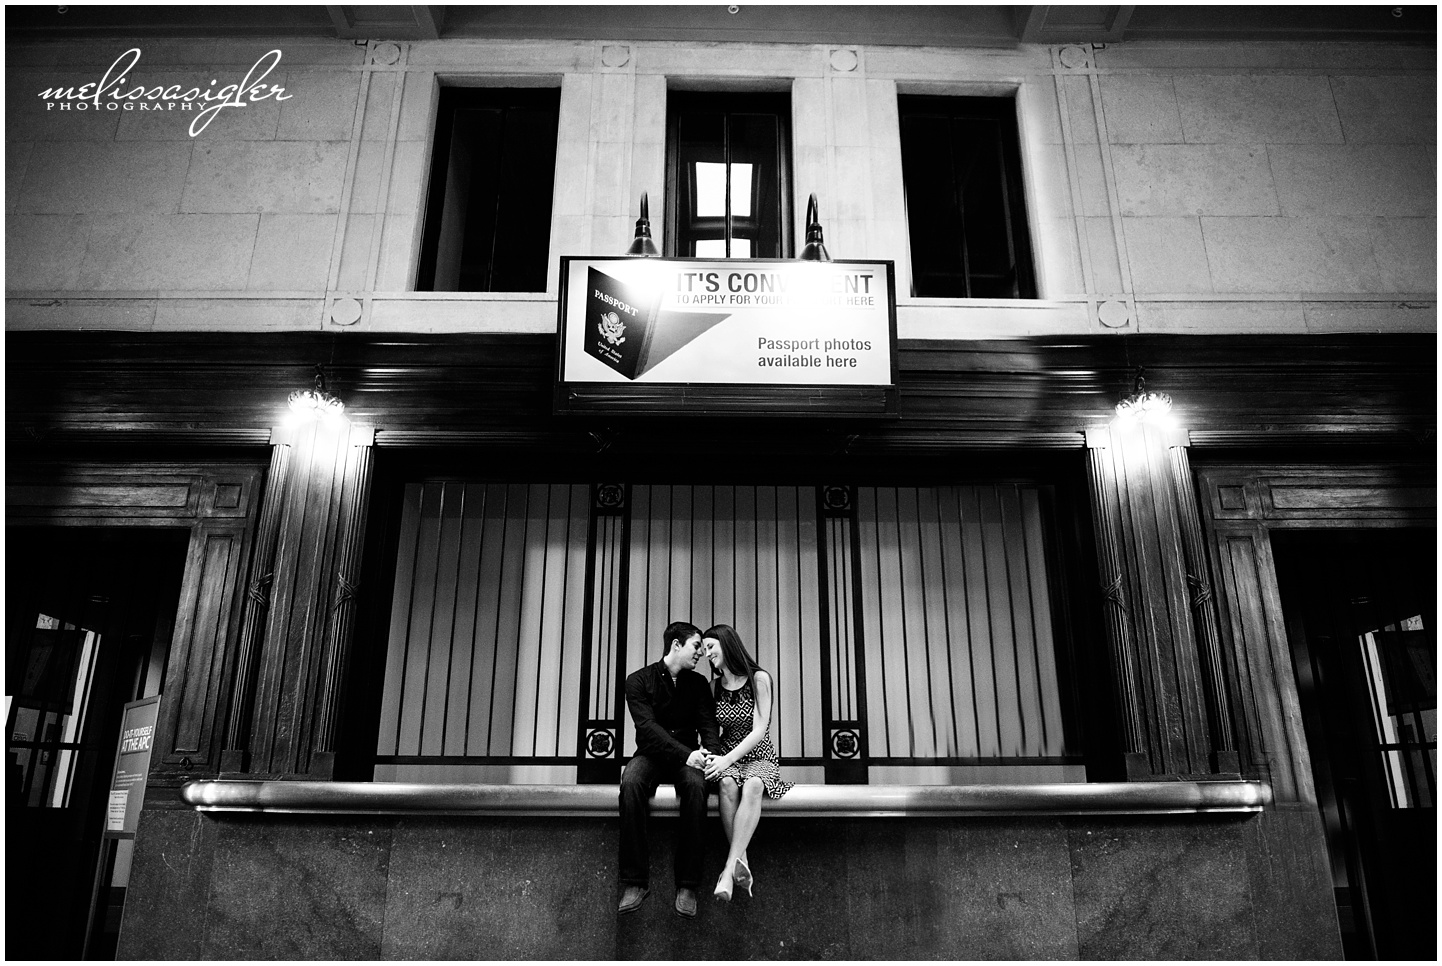 Engagement session at Union Station in Kansas City